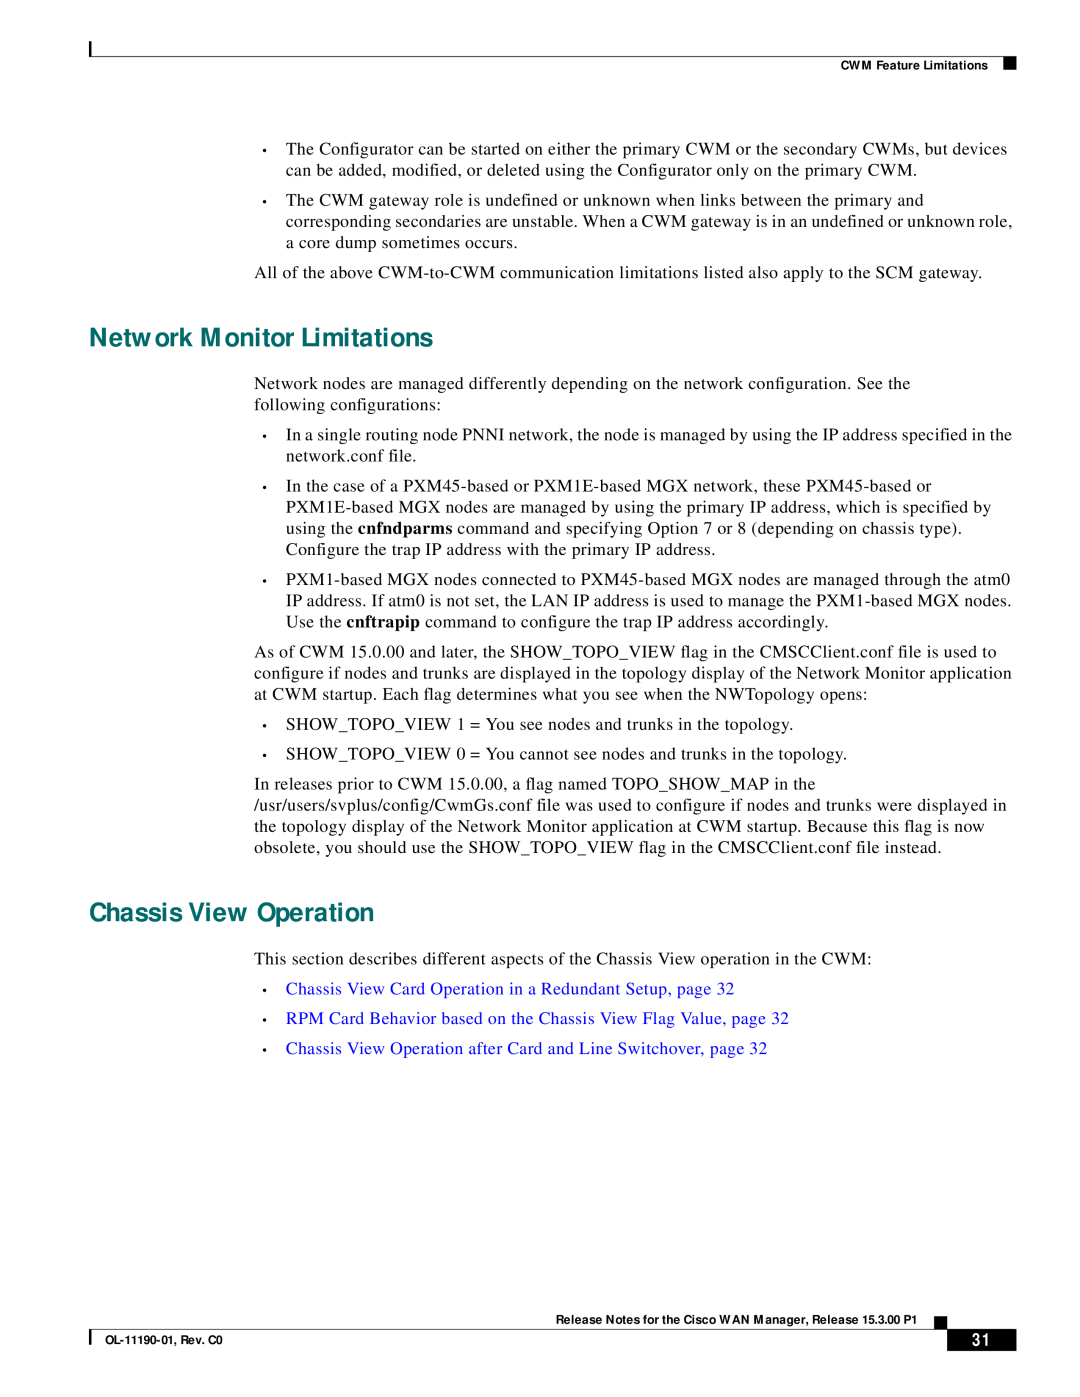 Cisco Systems 15.3.00P1 manual Network Monitor Limitations, Chassis View Operation 